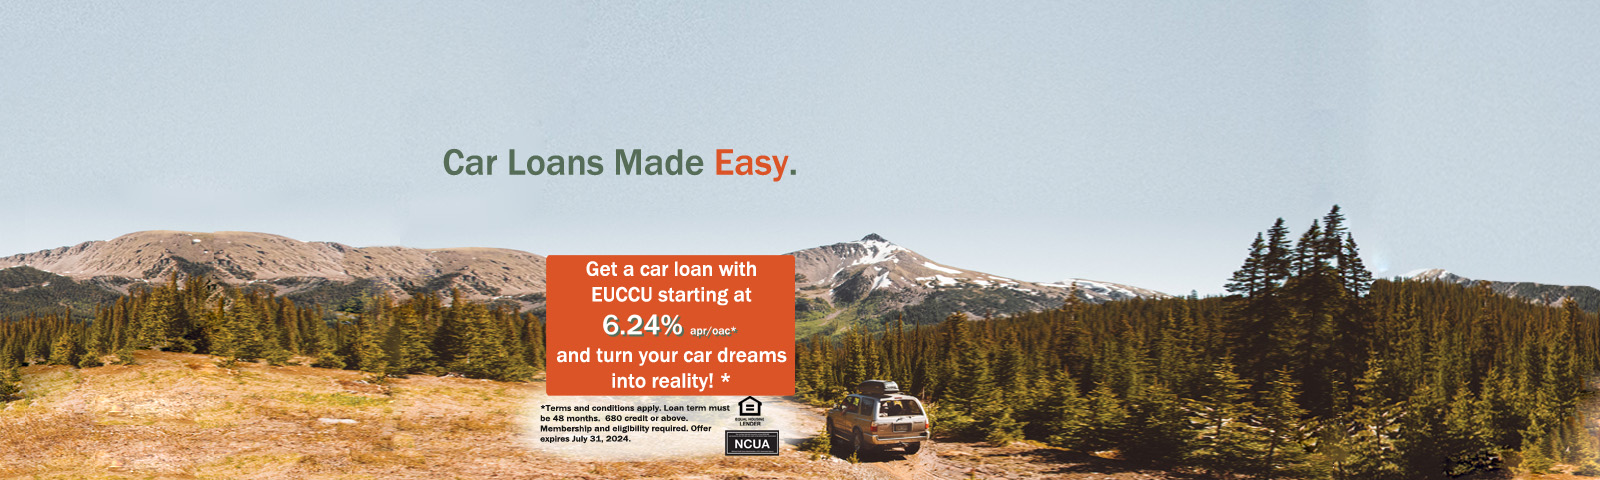 Car laons made easy. Get a car loan with EUCCu startin at 6.24% apr/oac* and turn your card dreams into reality!.